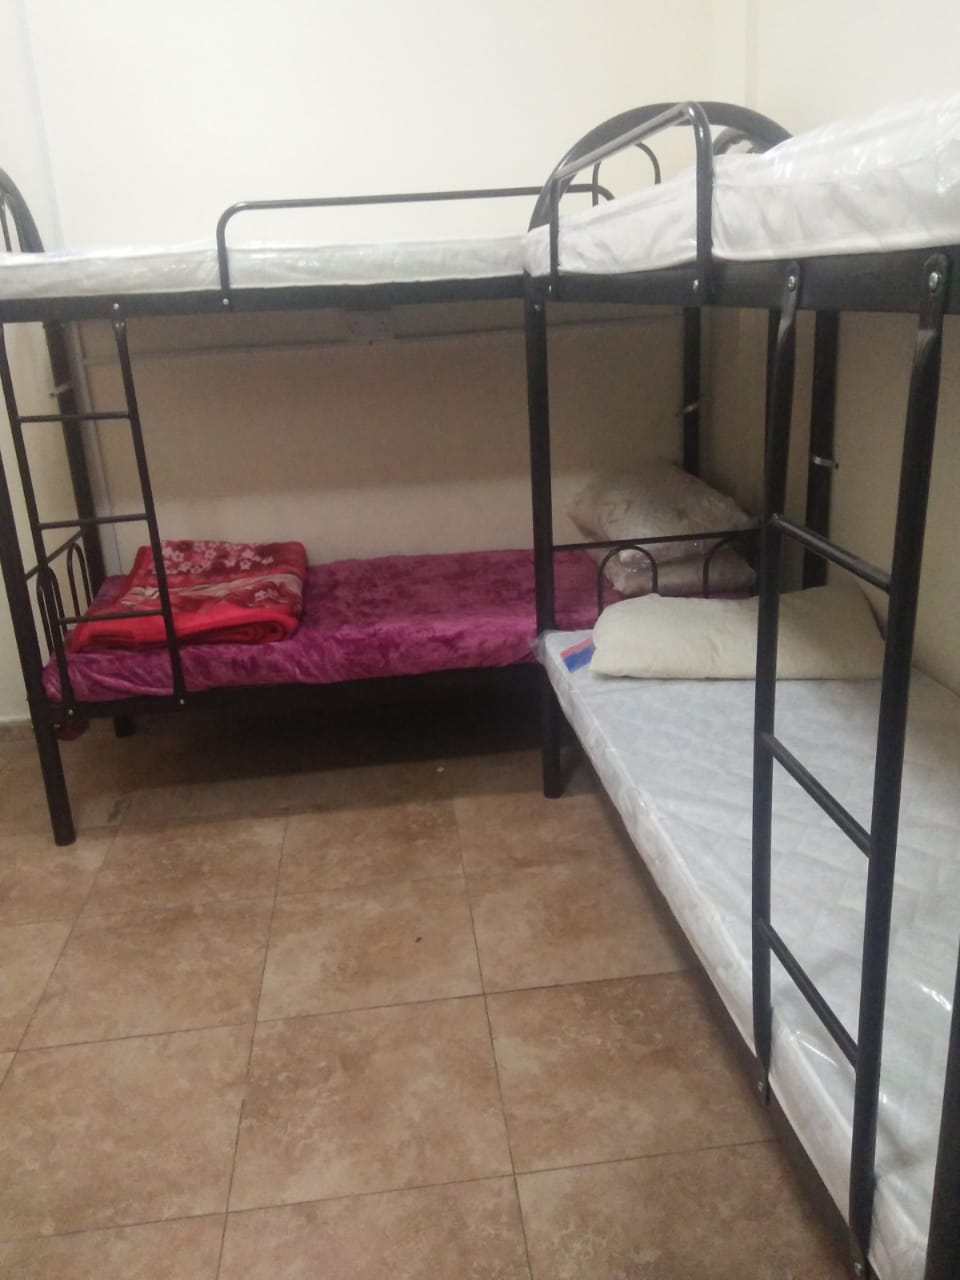 BED SPACE FOR MALE / FEMALE FROM AED 650 ONWARDS NEAR UNION/BANIY